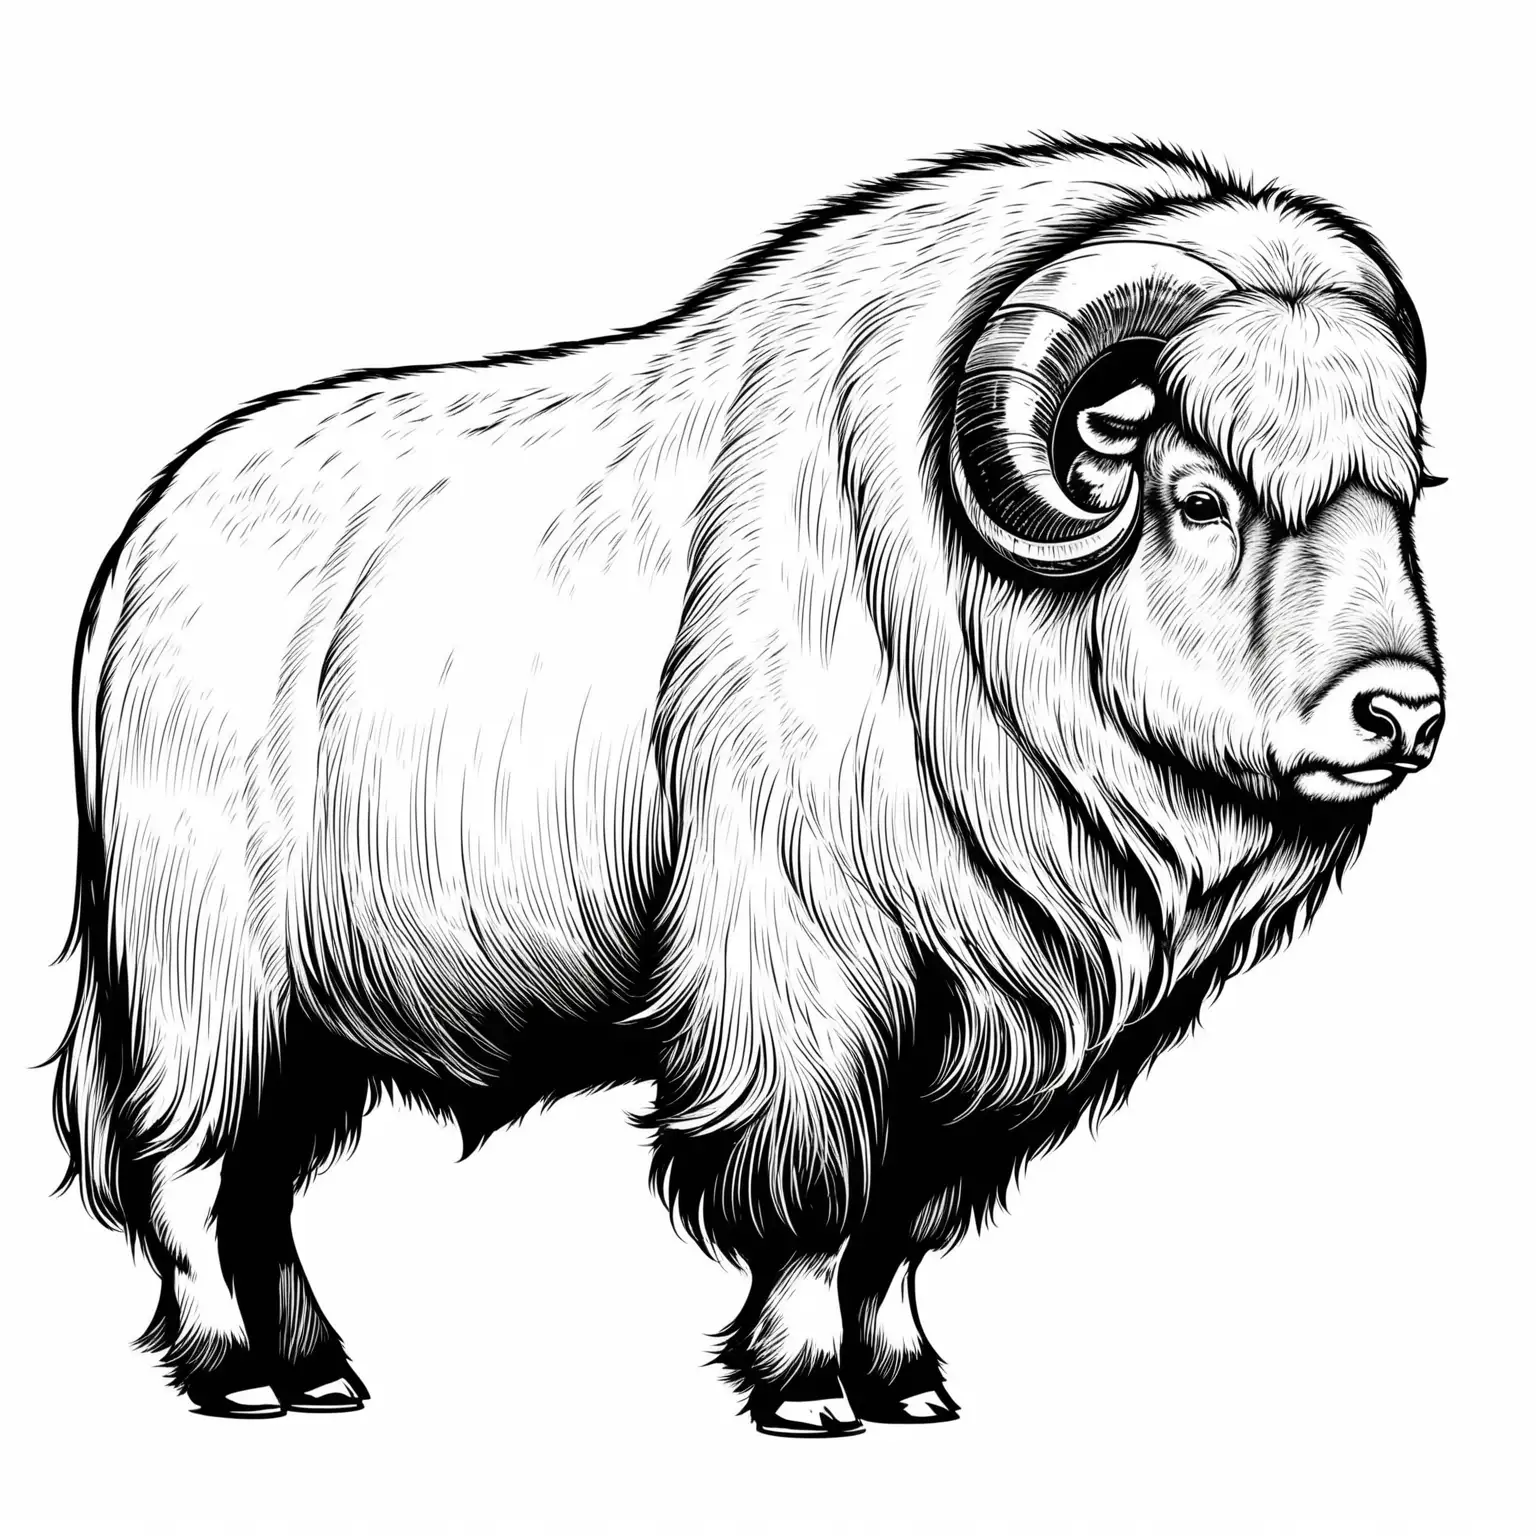 Musk Ox Sketches Bold Black and White Outlines on Clean White Background